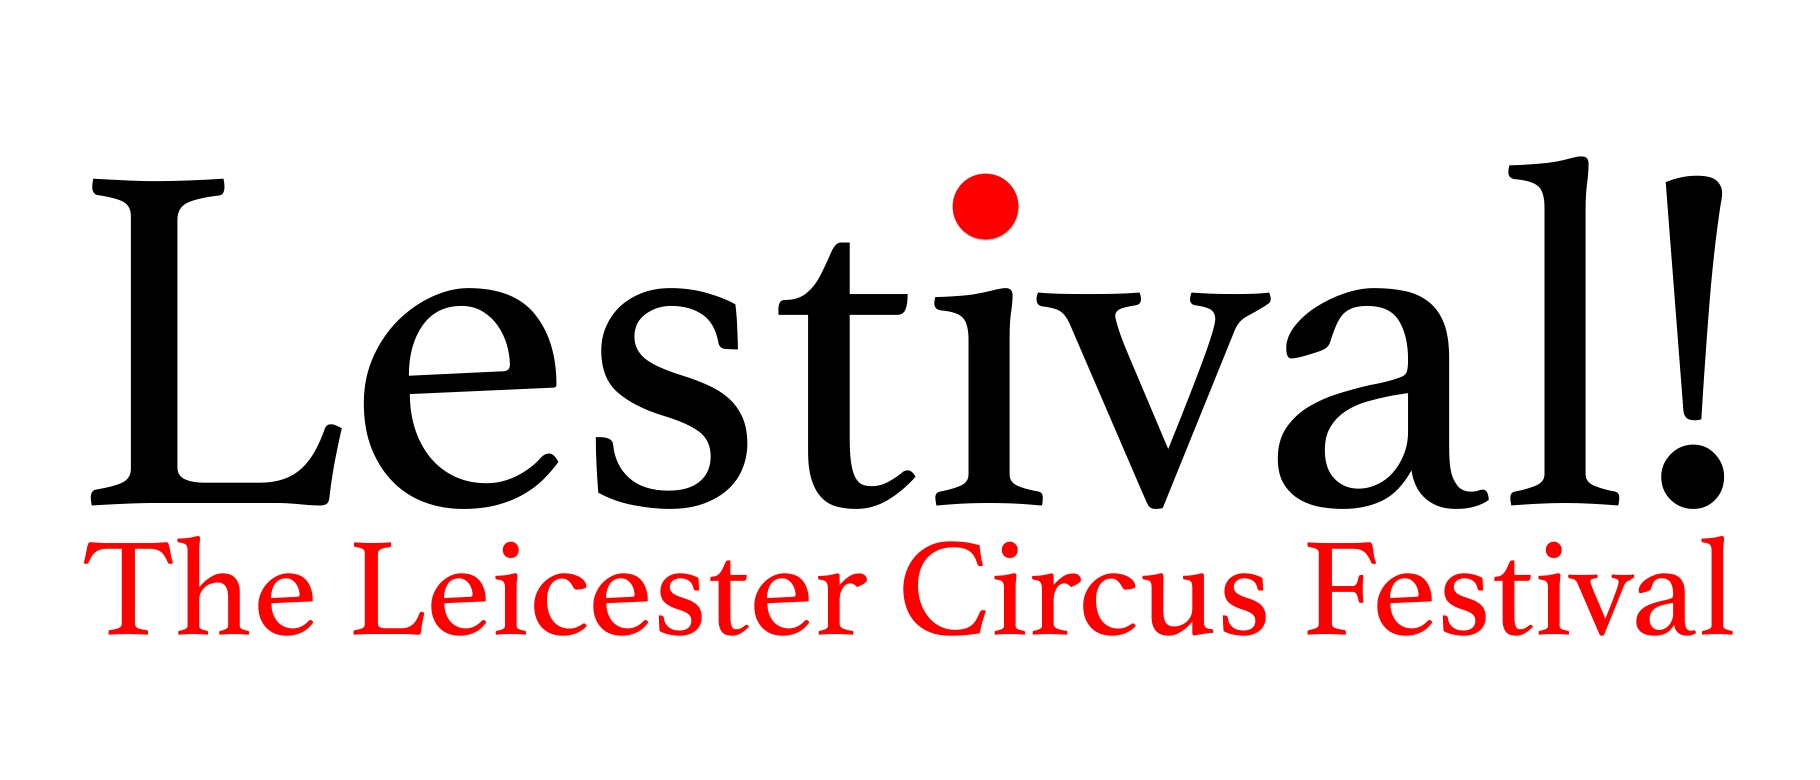 Lestival XII: The Leicester Circus Festival